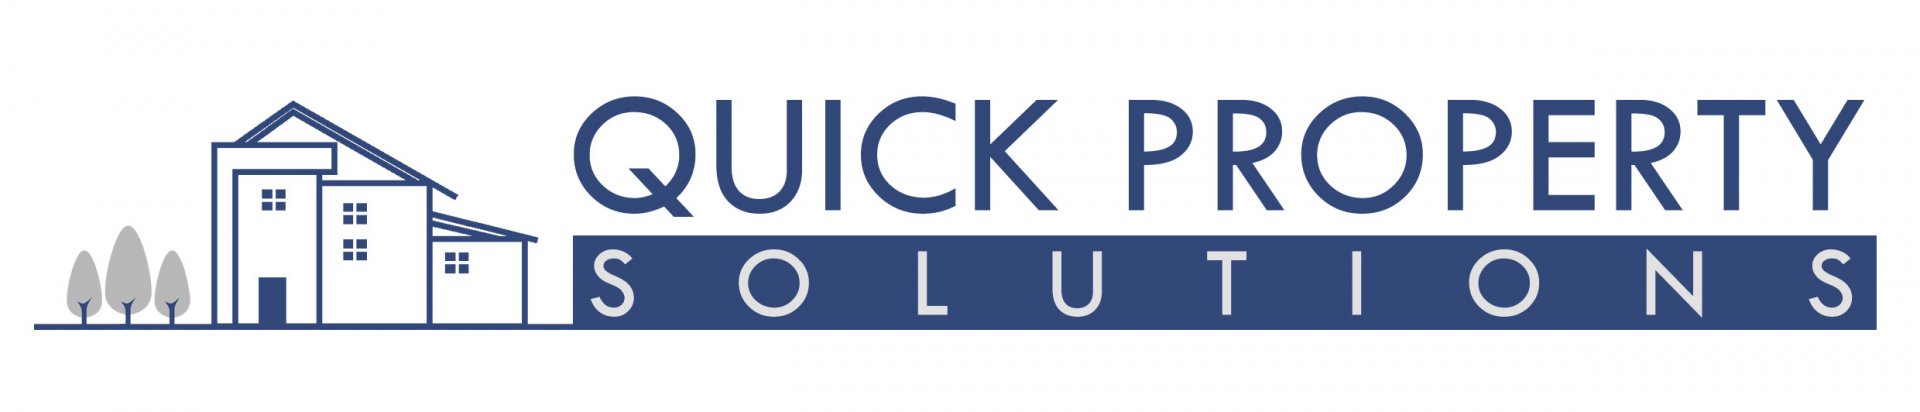 Quick Property Solutions logo